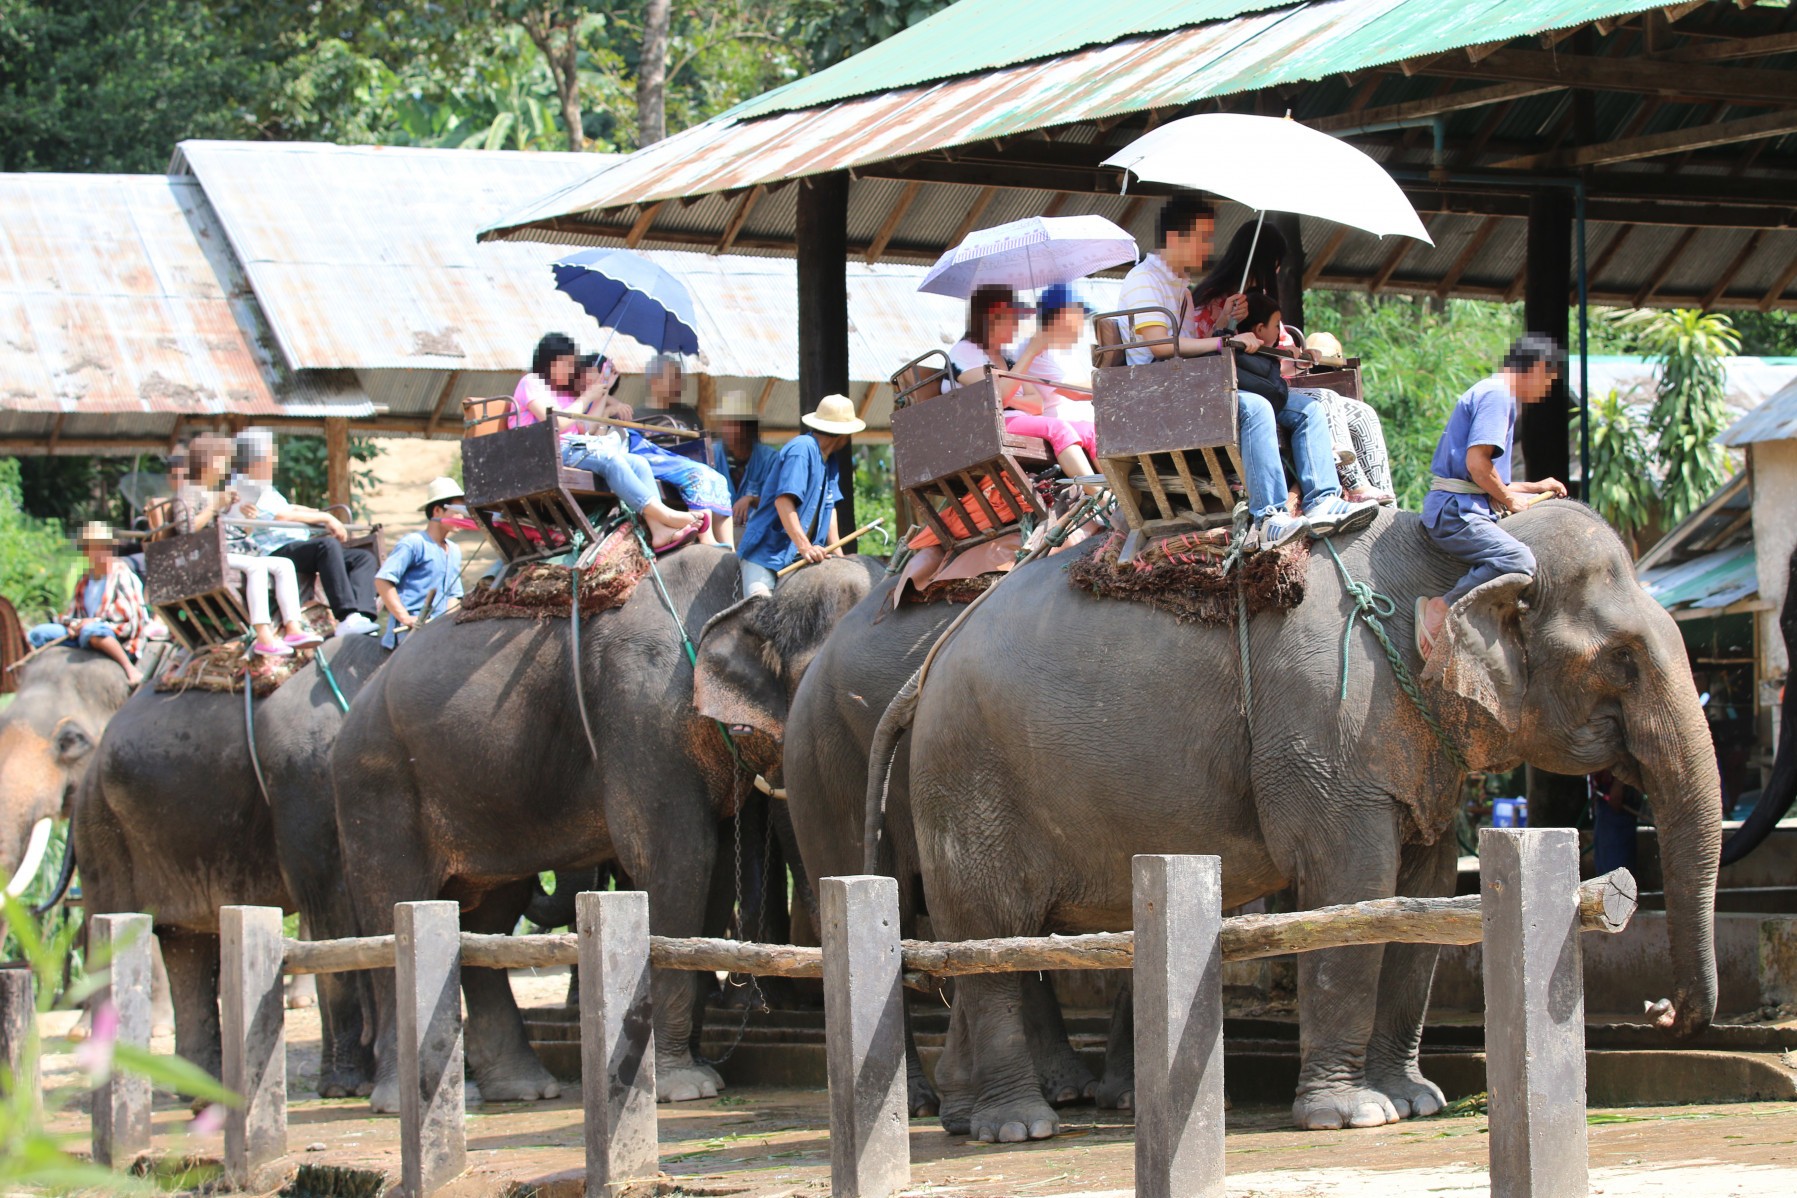 Elephants with tourists sitting on their backs for a ride. 